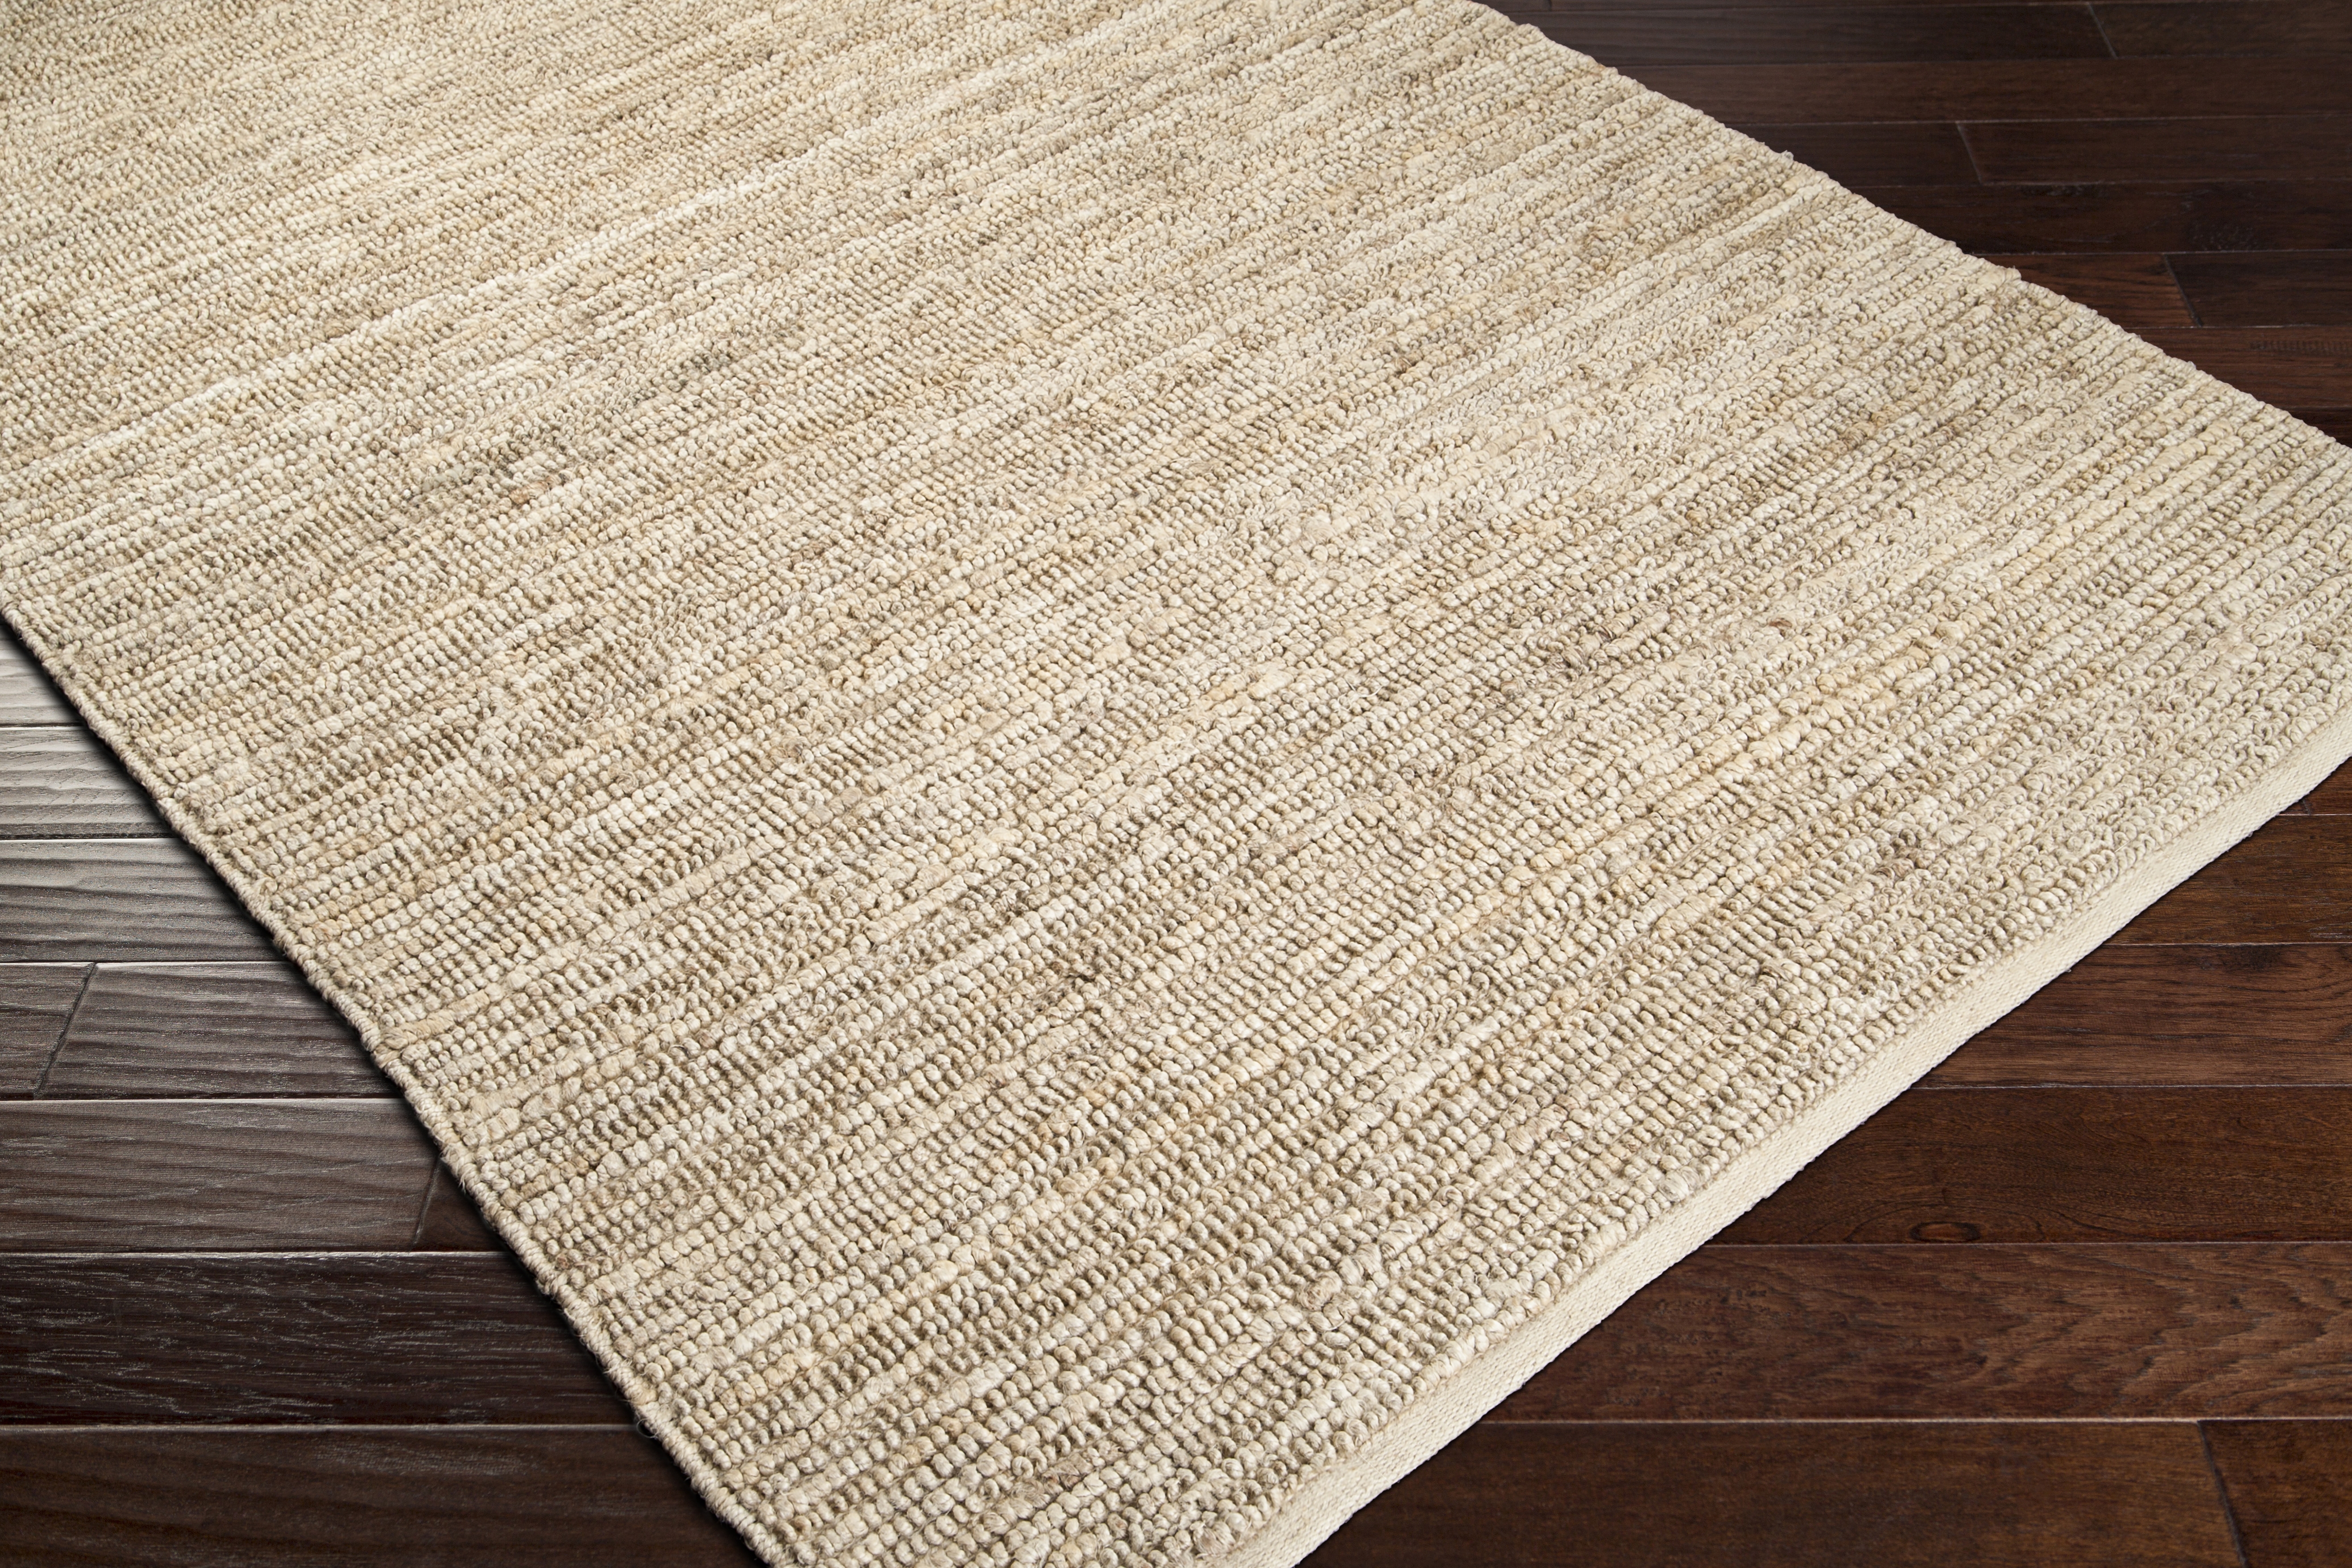 Continental Rug, 9' x 13' - Image 6